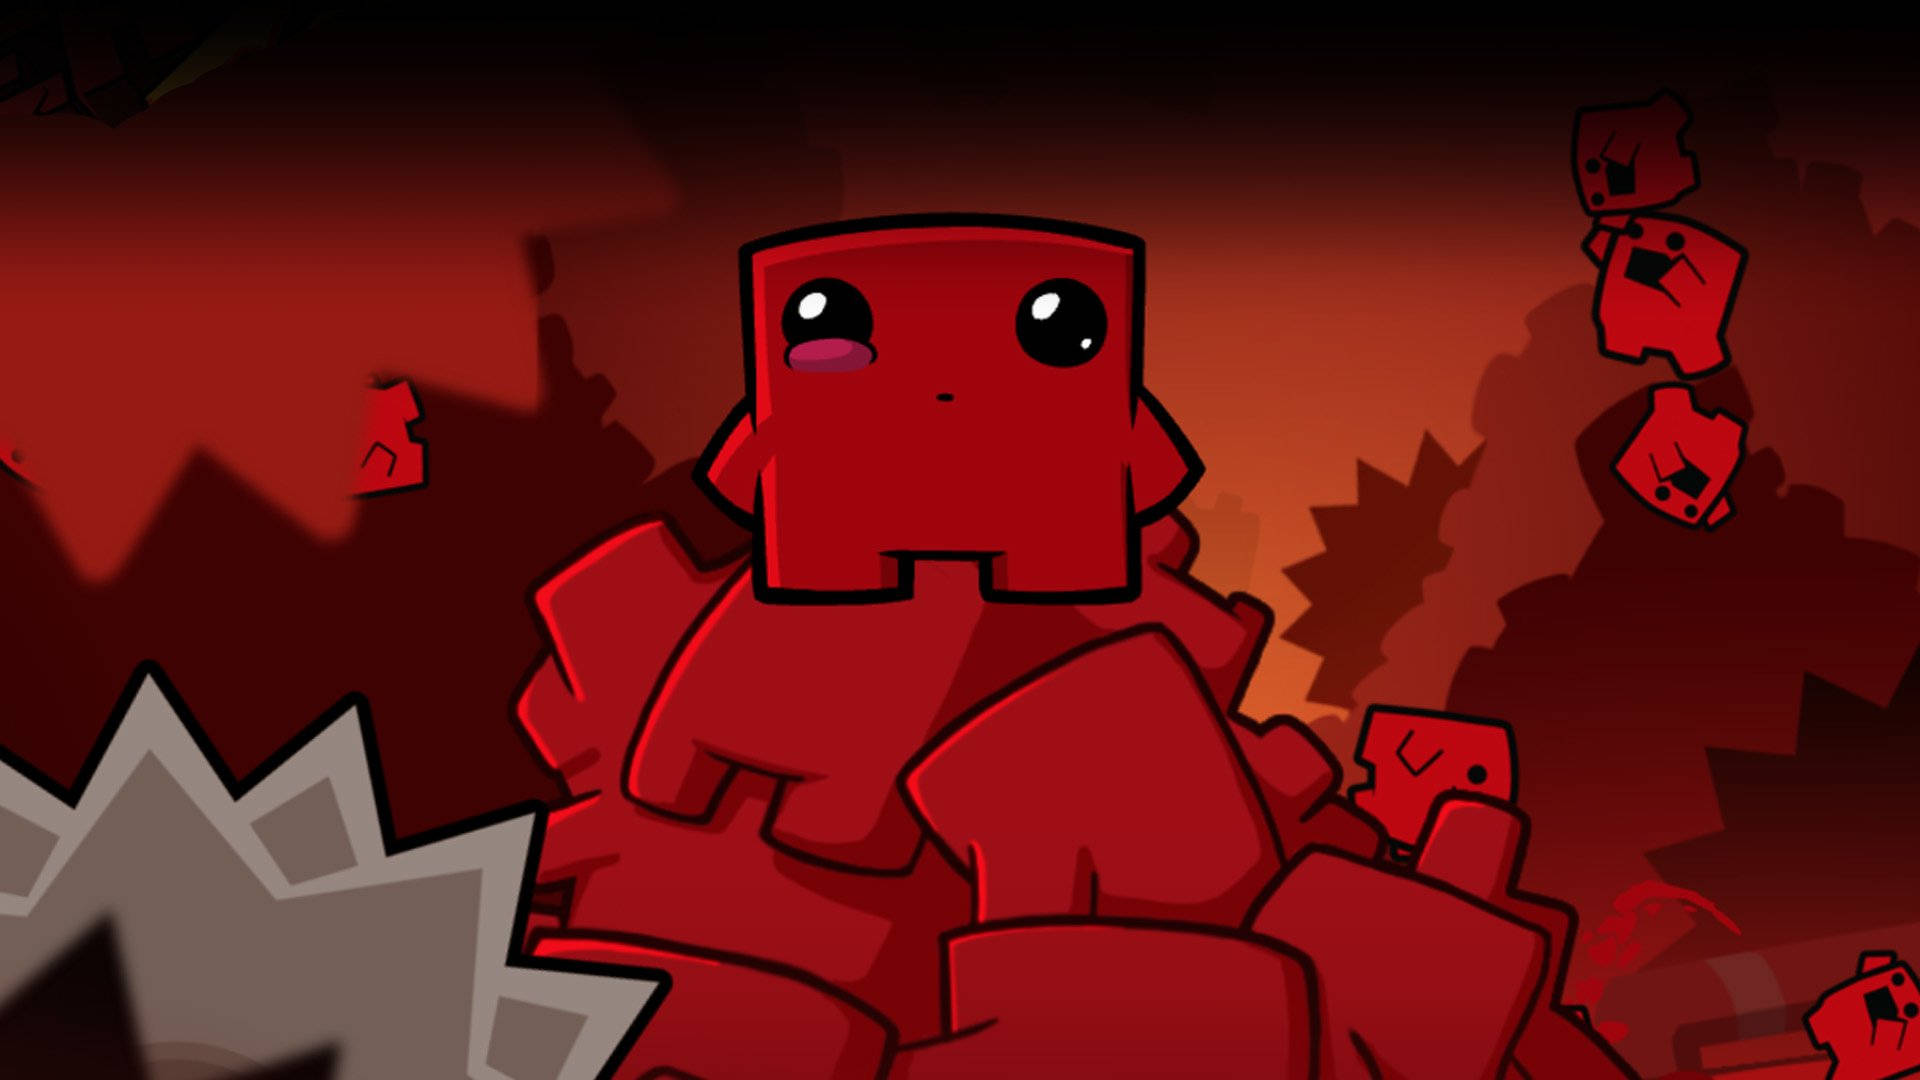 Super Meat Boy On Red Cubes